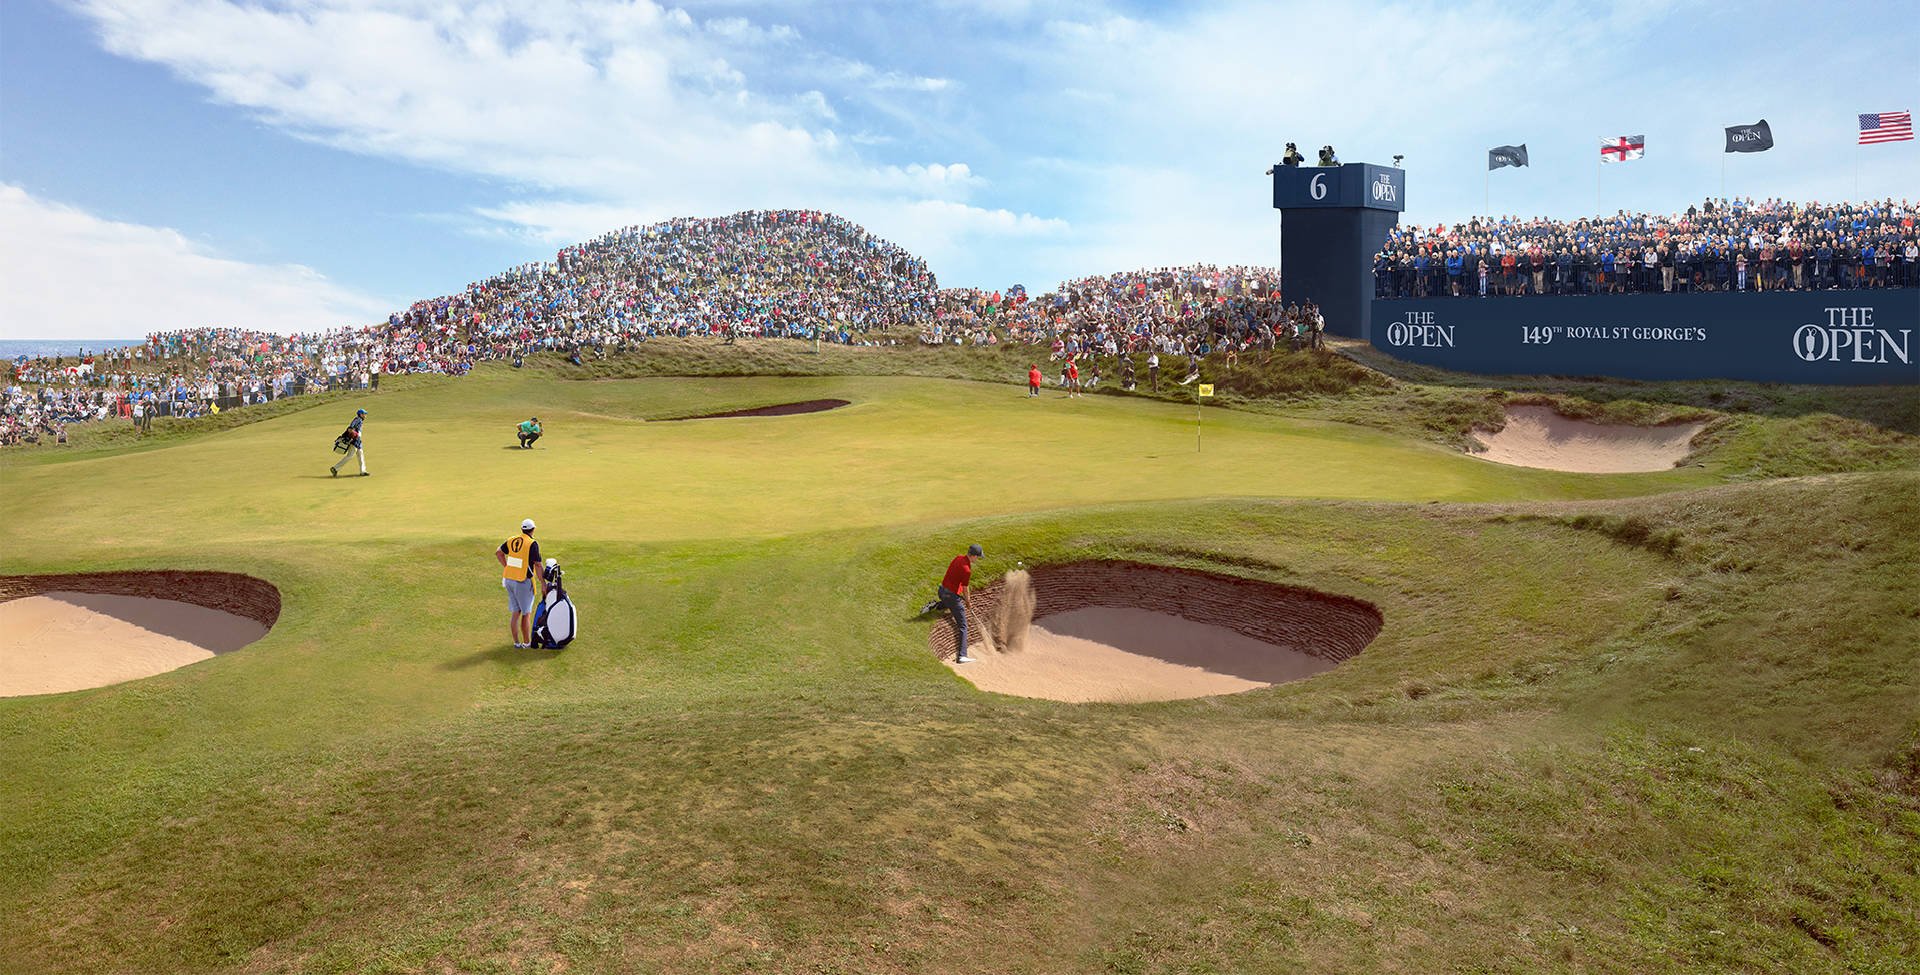 Royal St Georges hosts The 149th Open in 2020